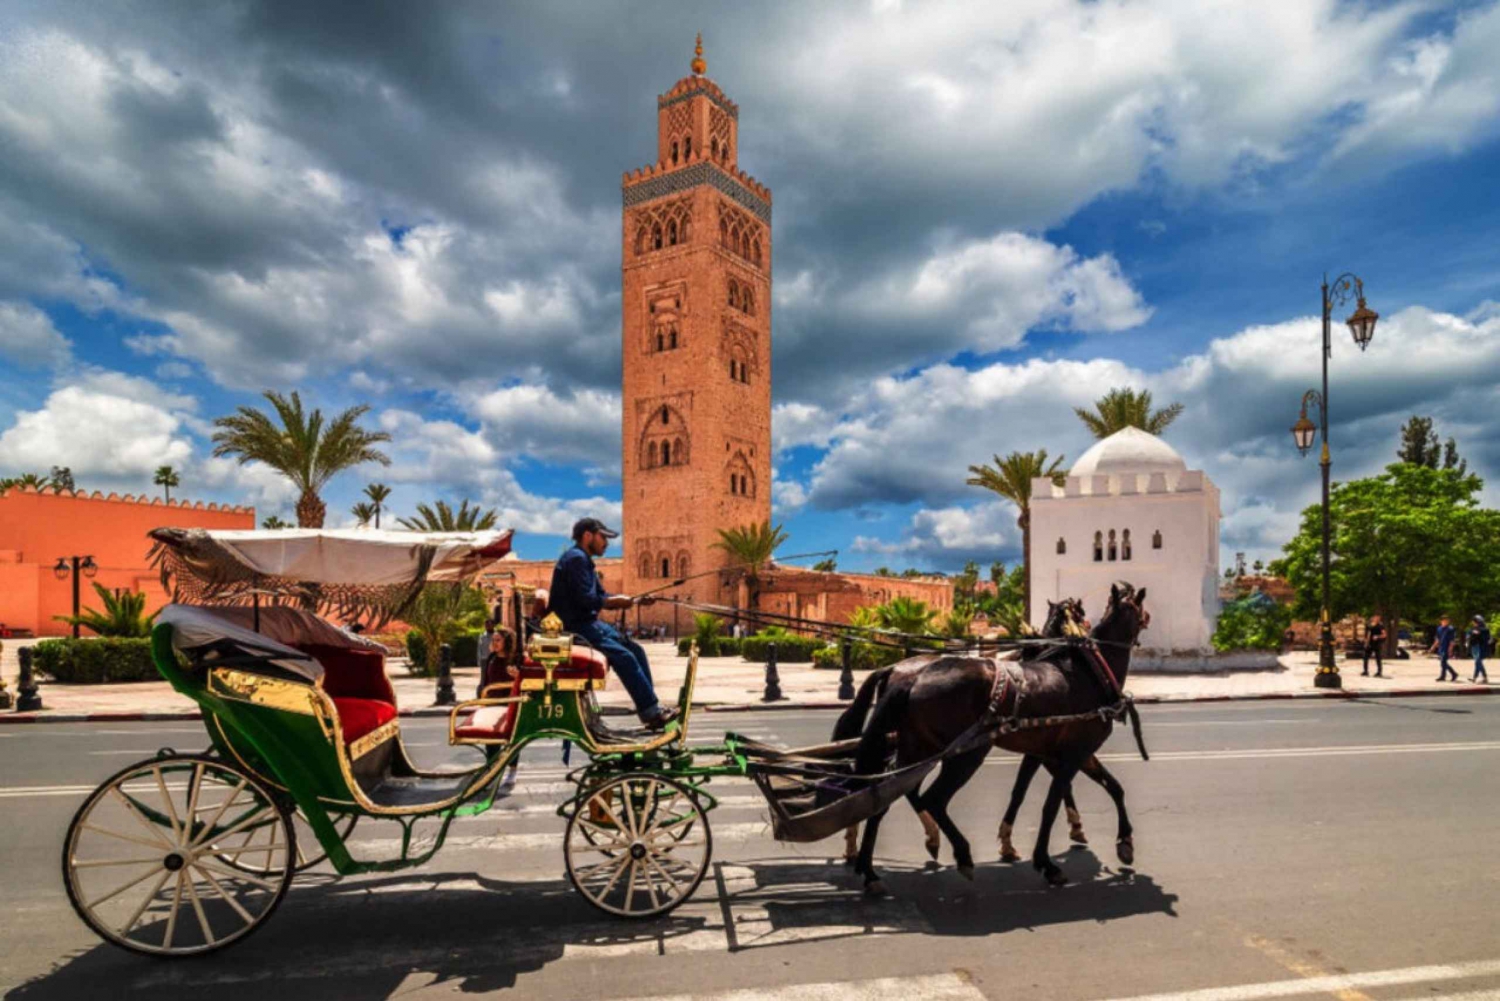 From Agadir: Marrakech Day Trip with Guided Tour